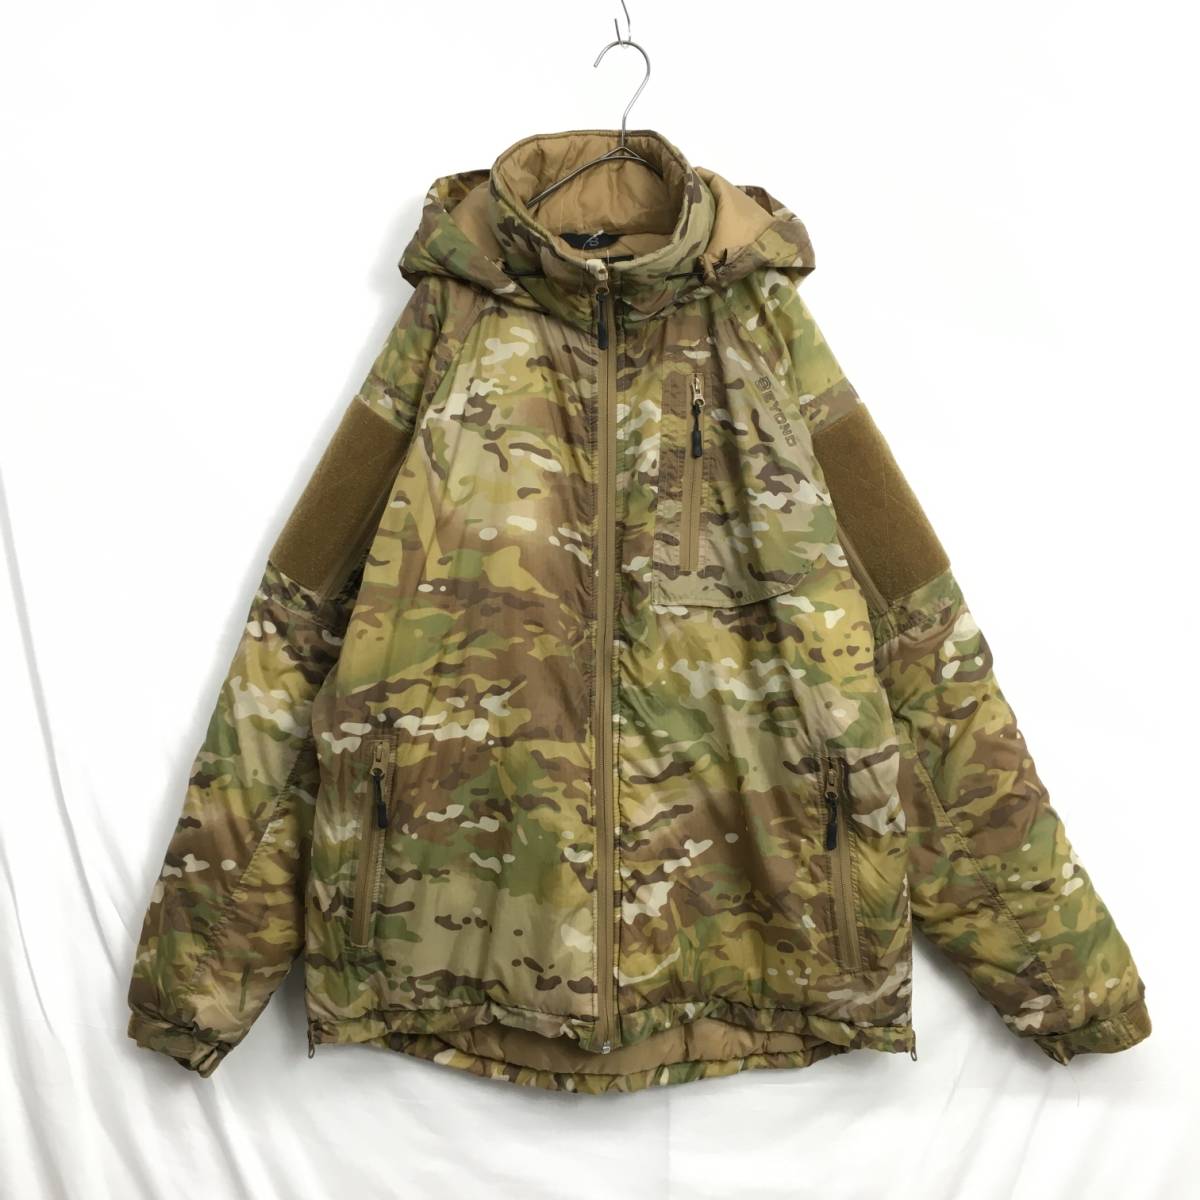 KZ5898★BEYOND CLOTHING : A7 AXIOS COLD JACKET★M★マルチカム ビヨンドクロージング